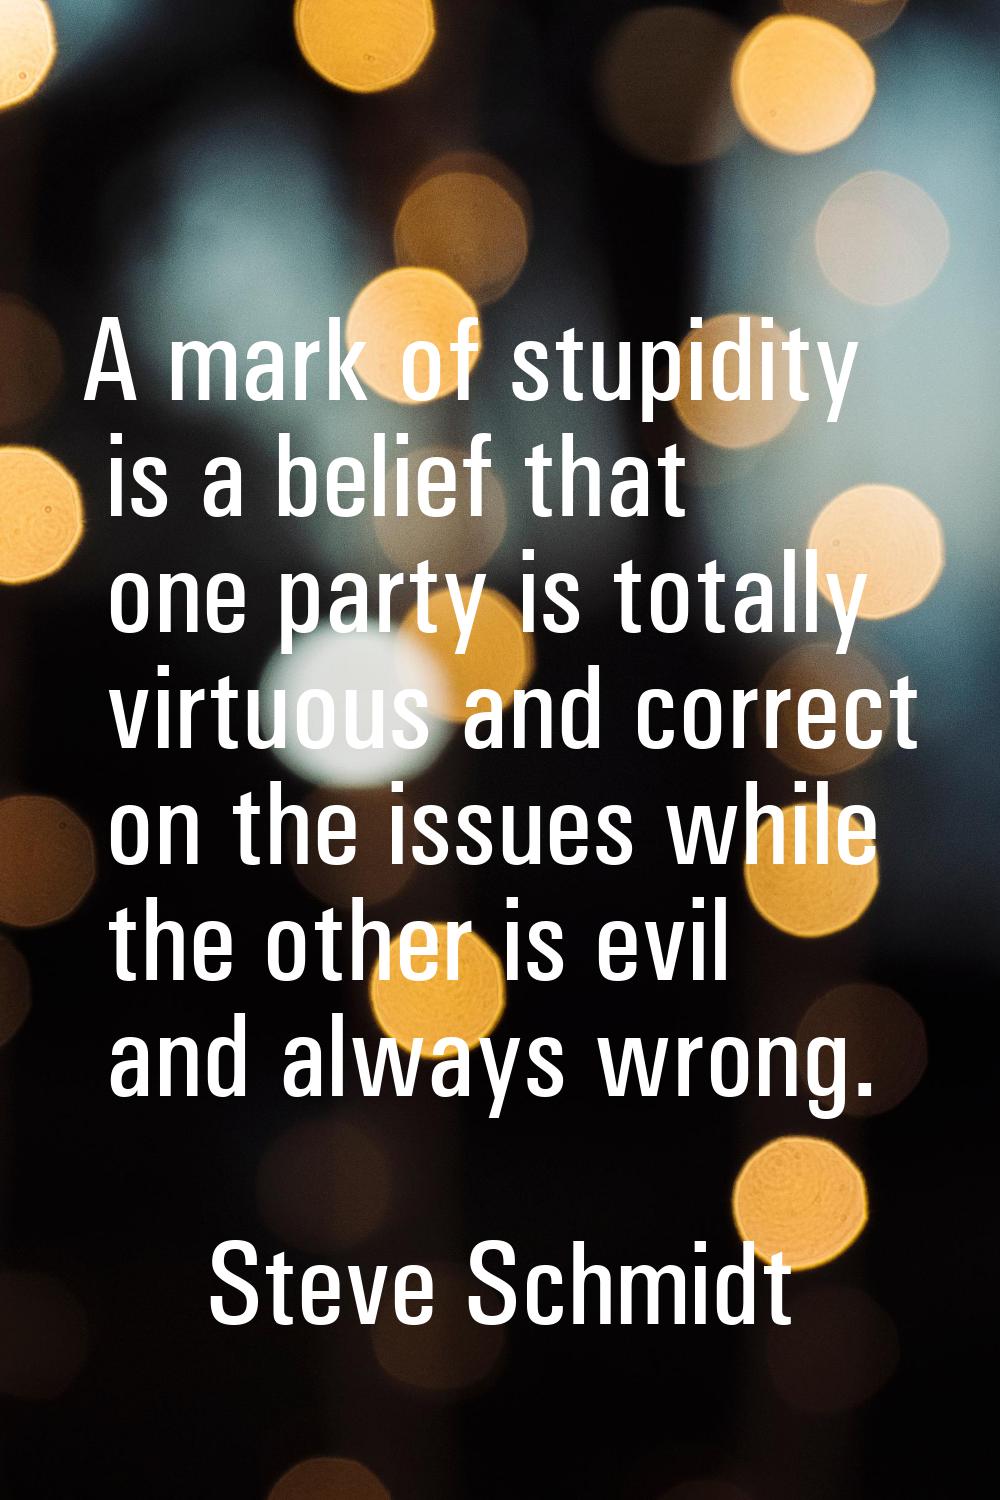 A mark of stupidity is a belief that one party is totally virtuous and correct on the issues while 